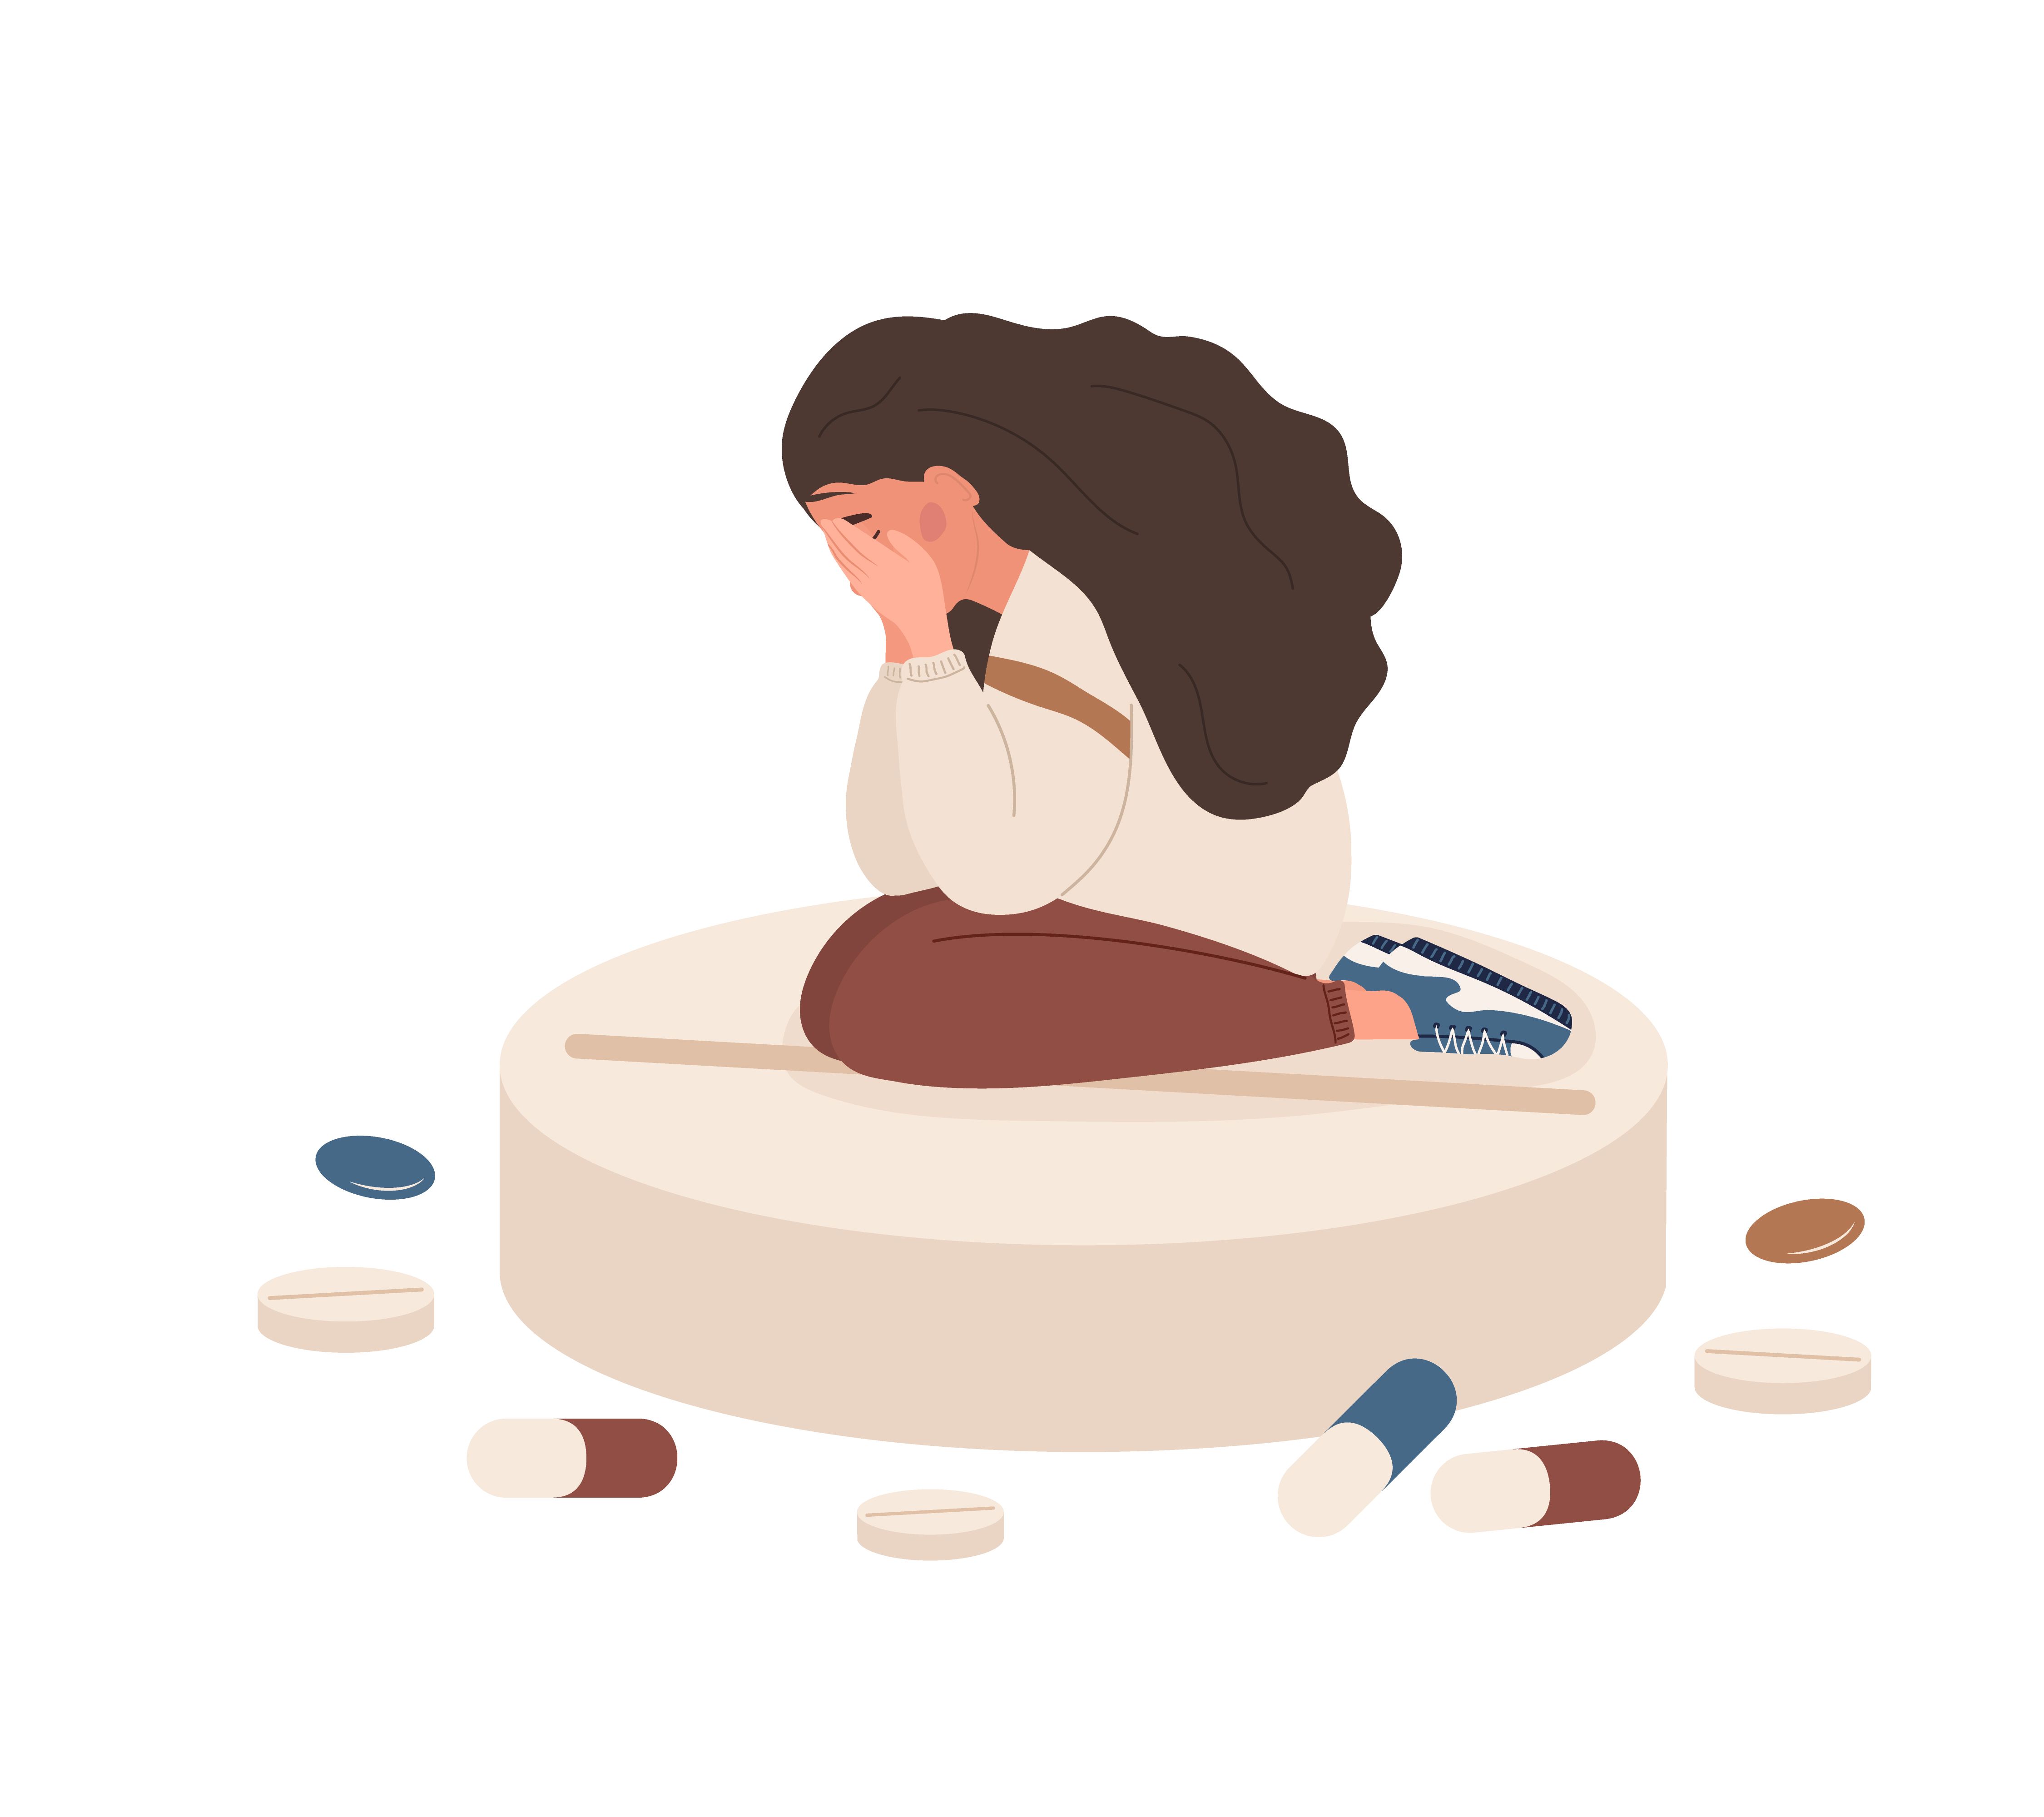 sad woman sitting on big pill mental disorders concept antidepressants, vitamins and hormonal medications depressed teenager needs medical care vector illustration in flat cartoon style